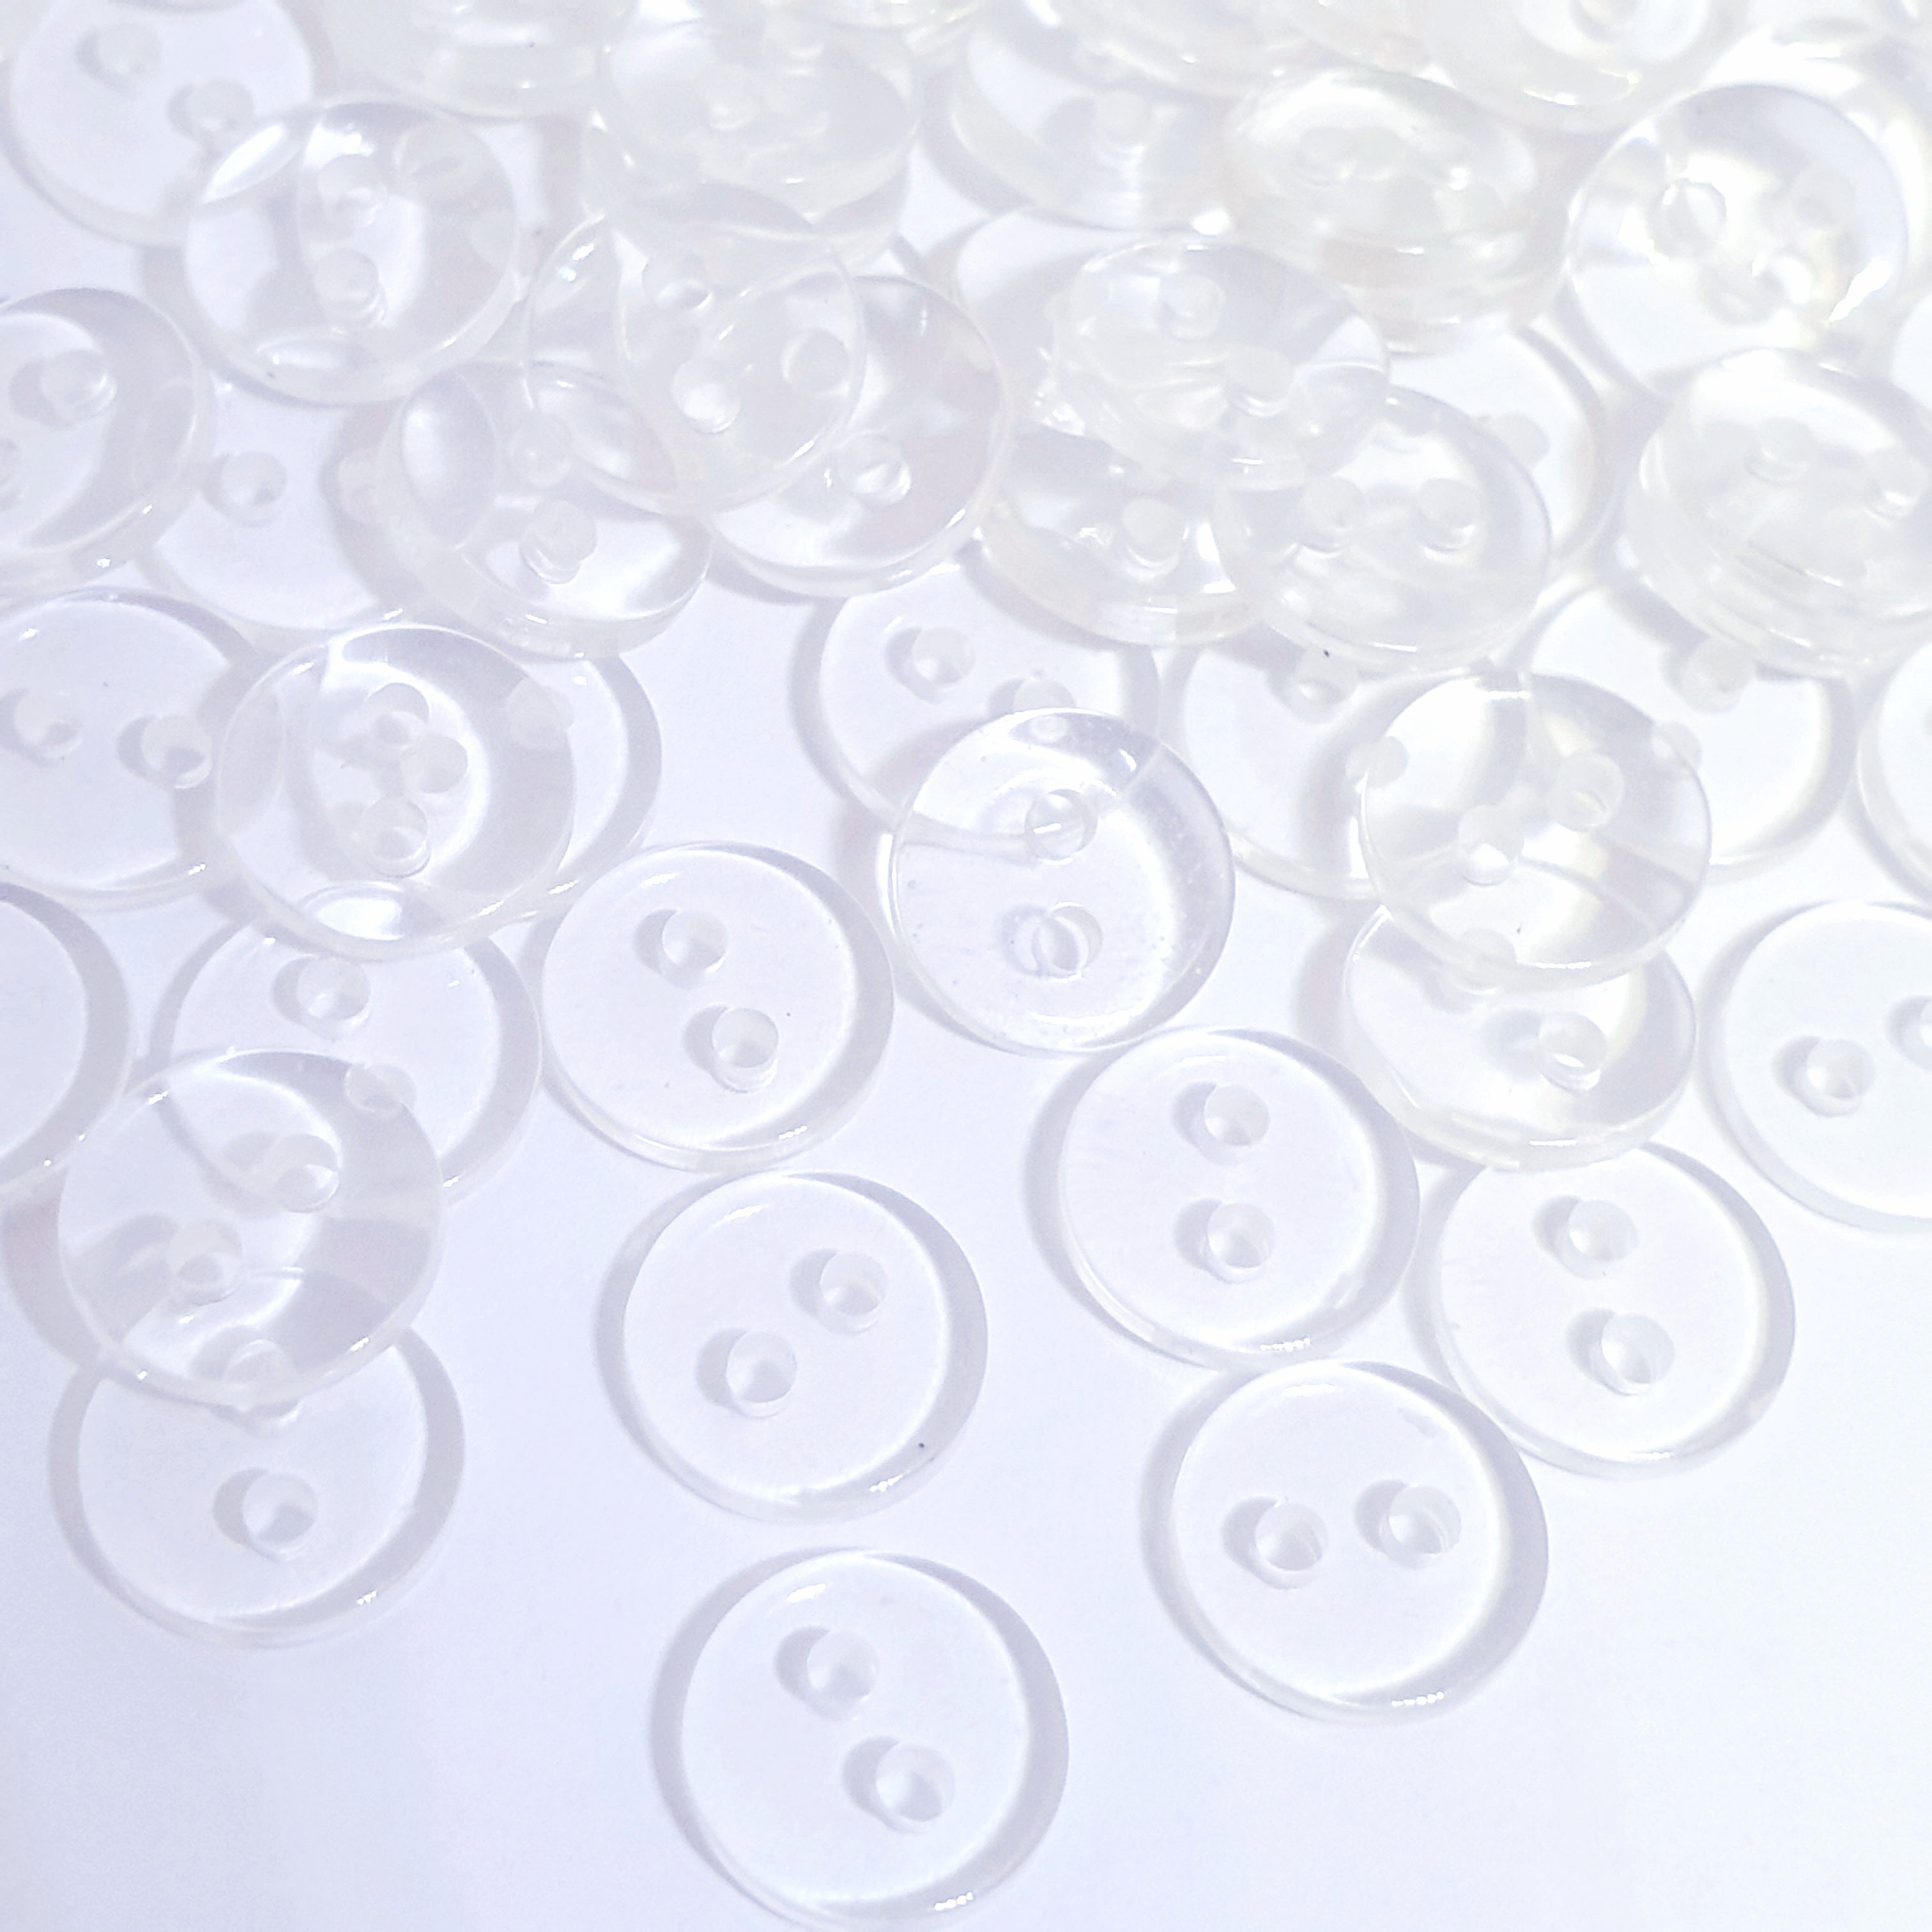 MajorCrafts 120pcs 9mm Transparent Clear 2 Holes Small Round Resin Sewing Buttons